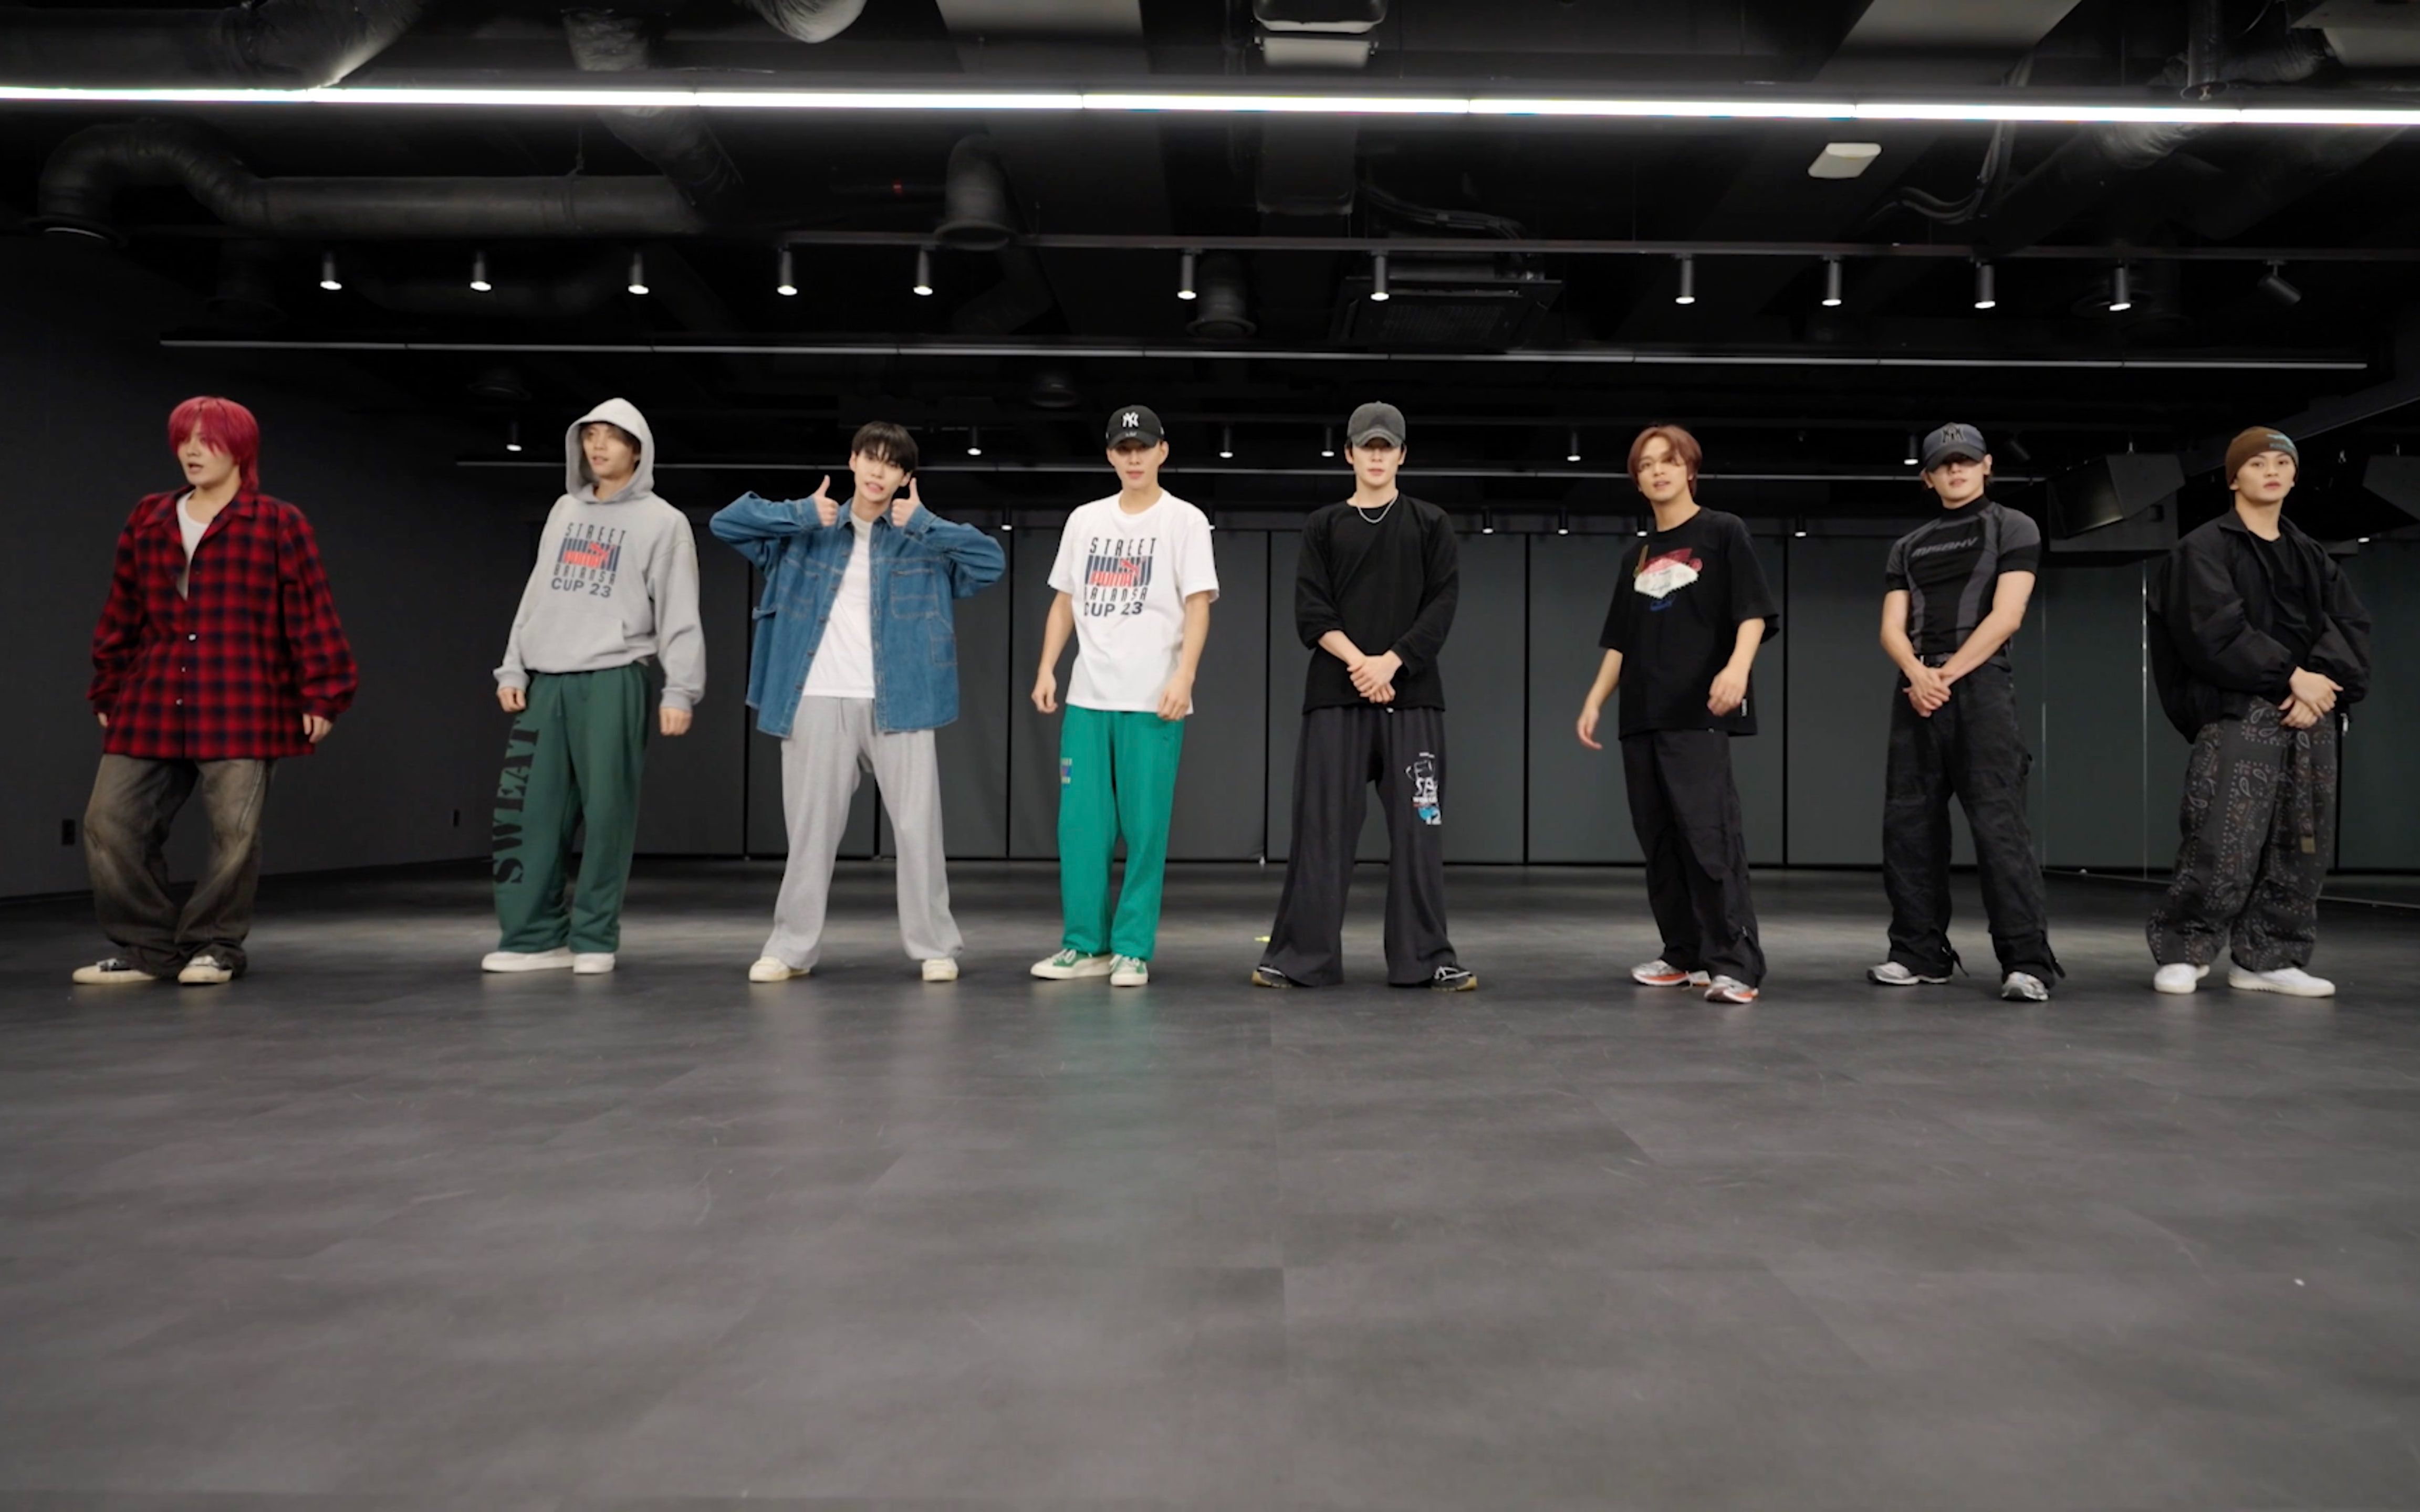 【NCT 127】NCT 127《Parade (前进)》Dance Practice